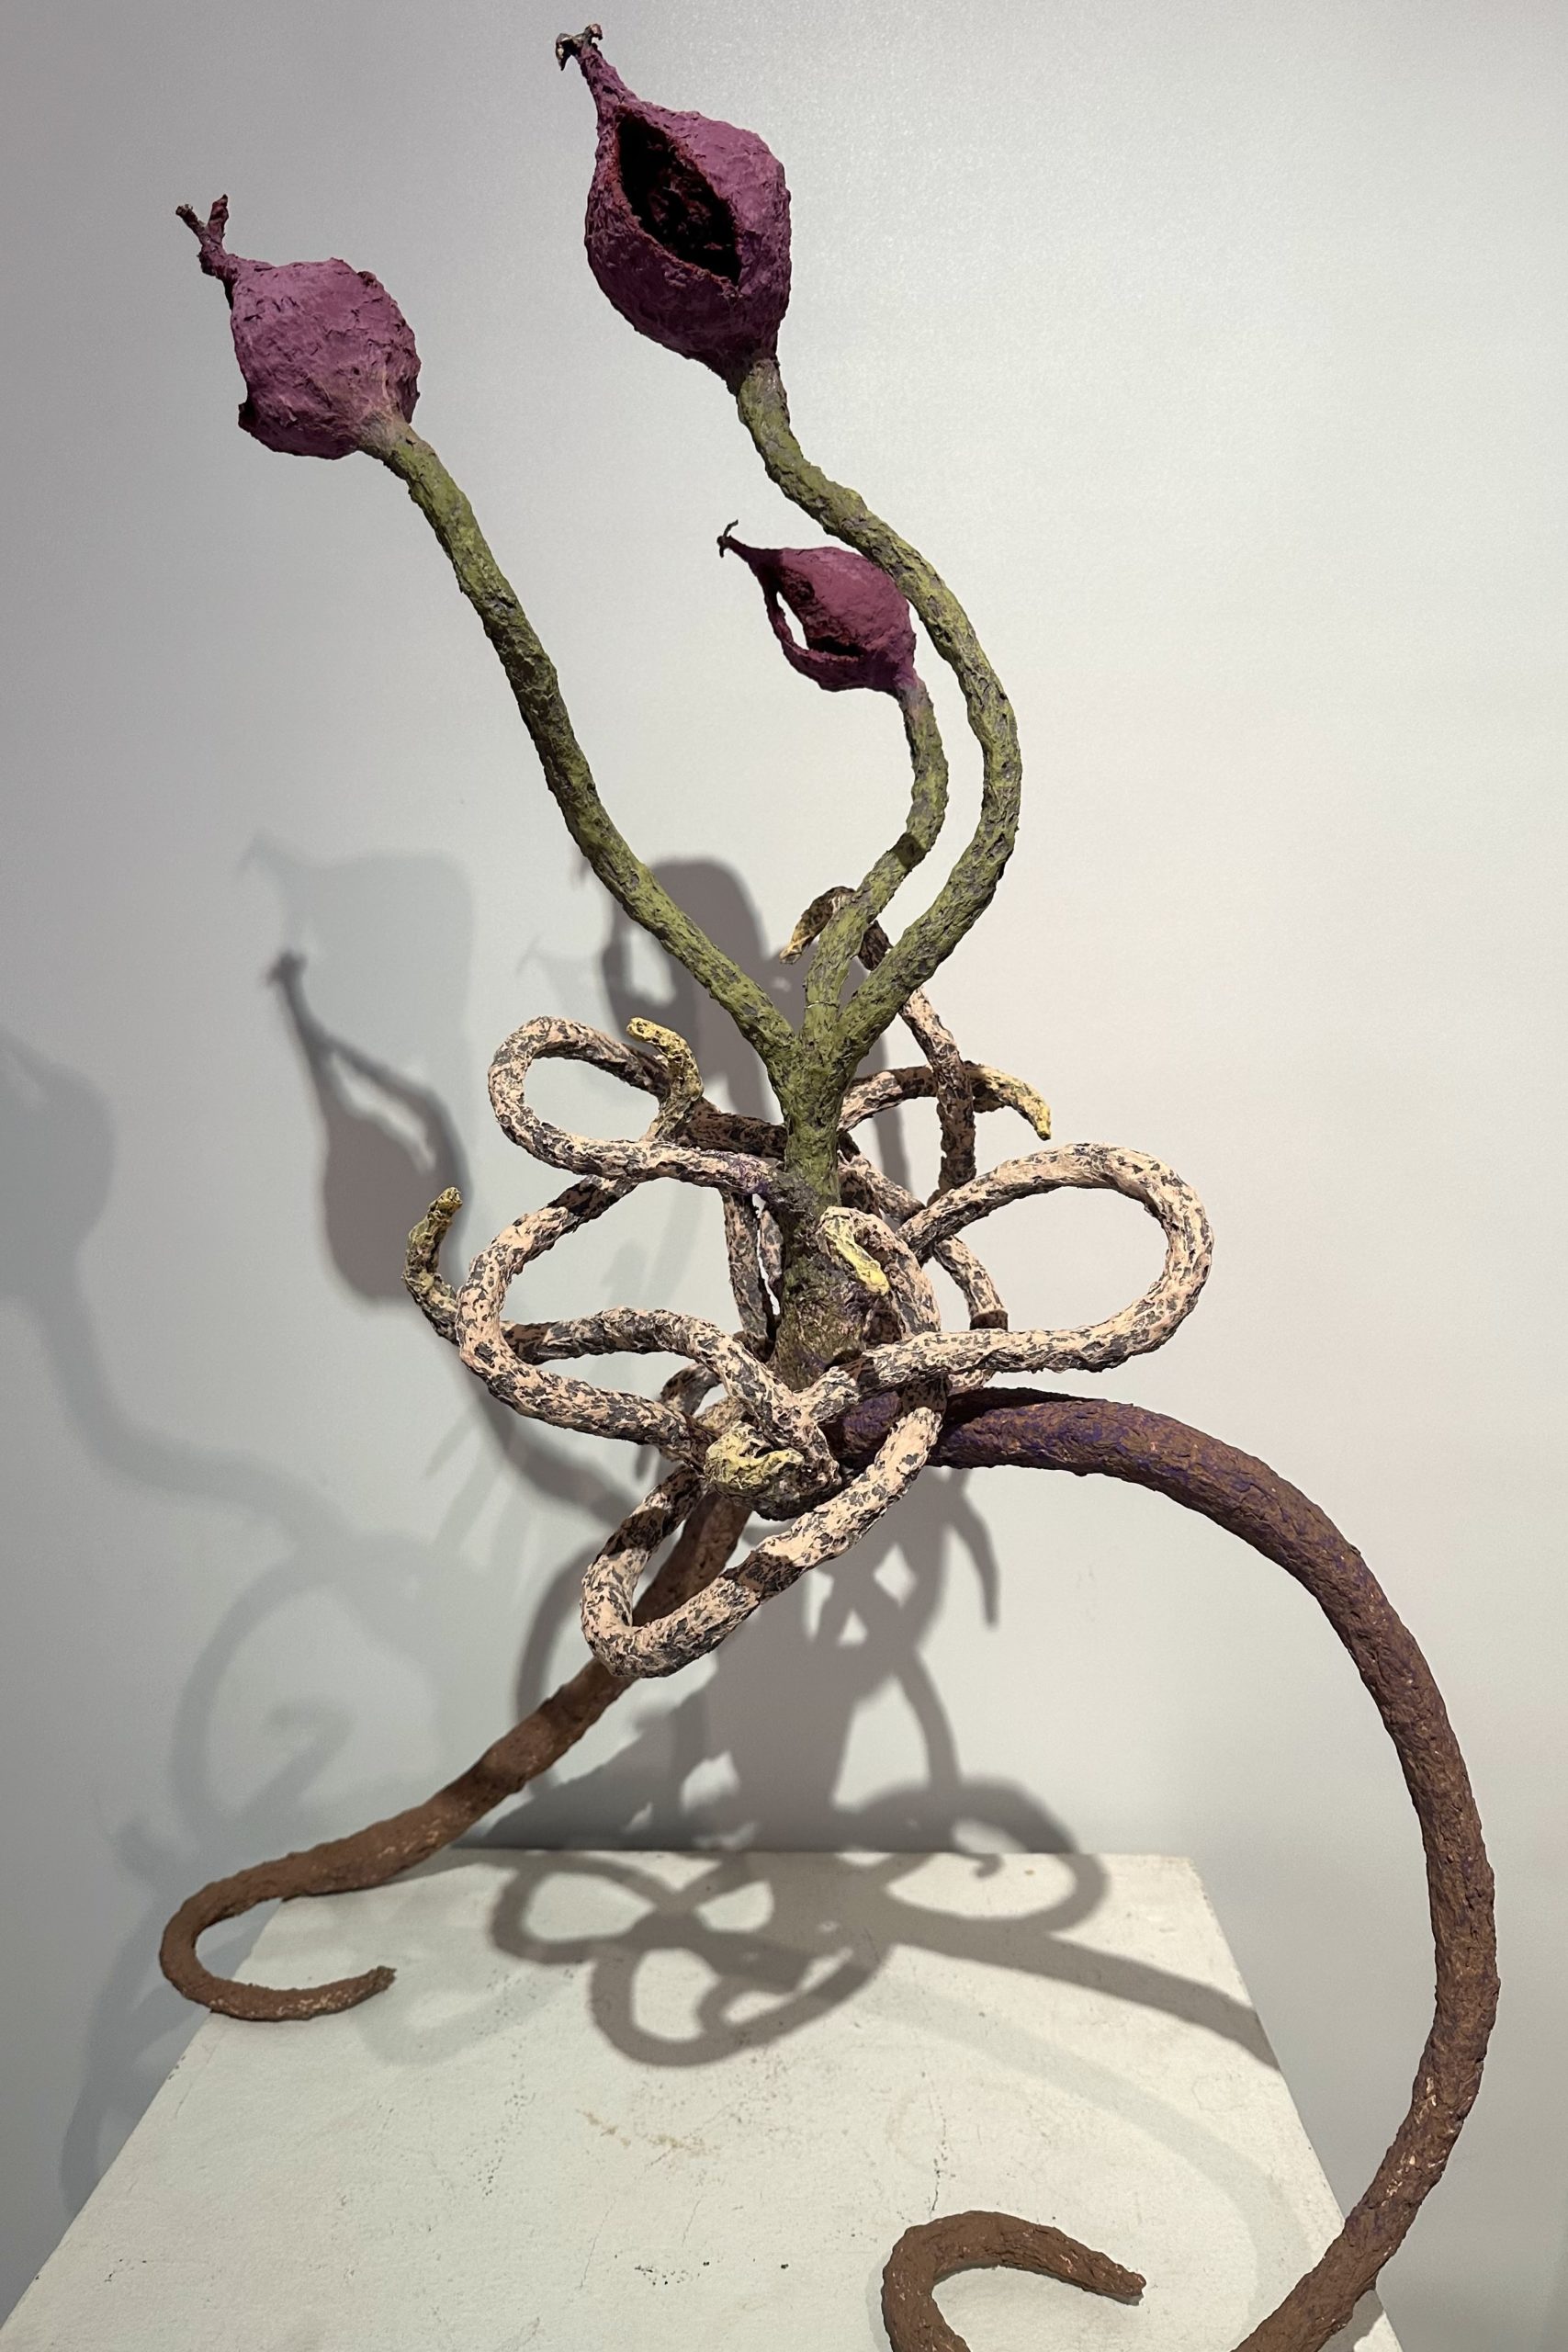 Photo of Mackenzie Sheehan-D'Arrigo's sculpture of a budding plant walking on its roots.